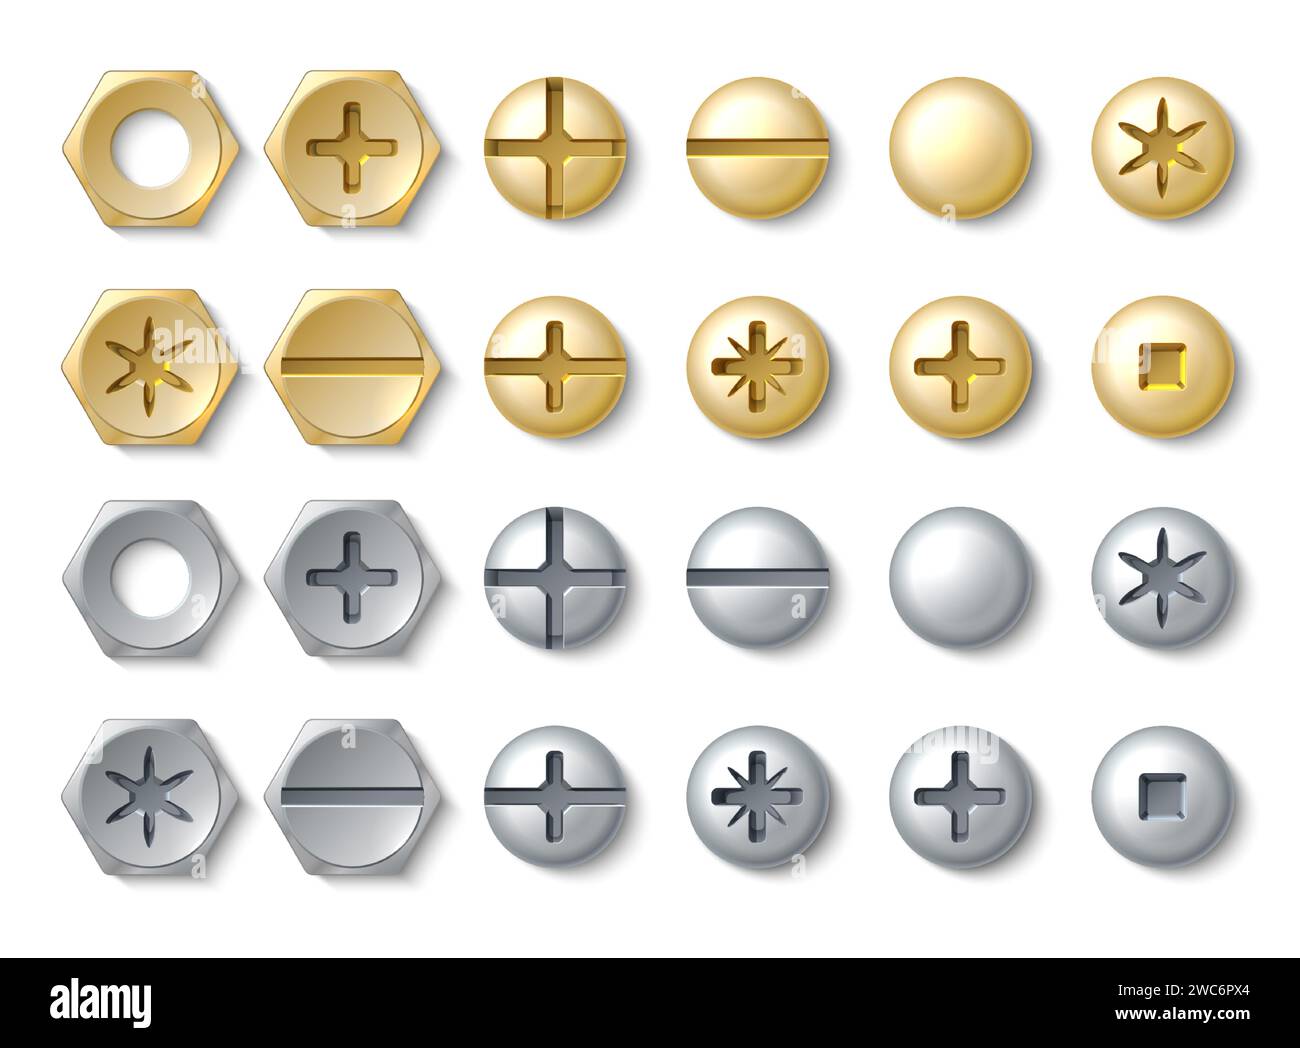 Bolt and screw. Realistic rivets and stainless self-tapping nail heads. Galvanized silver or bronze colored hardware. Assortment of round or hexagon i Stock Vector